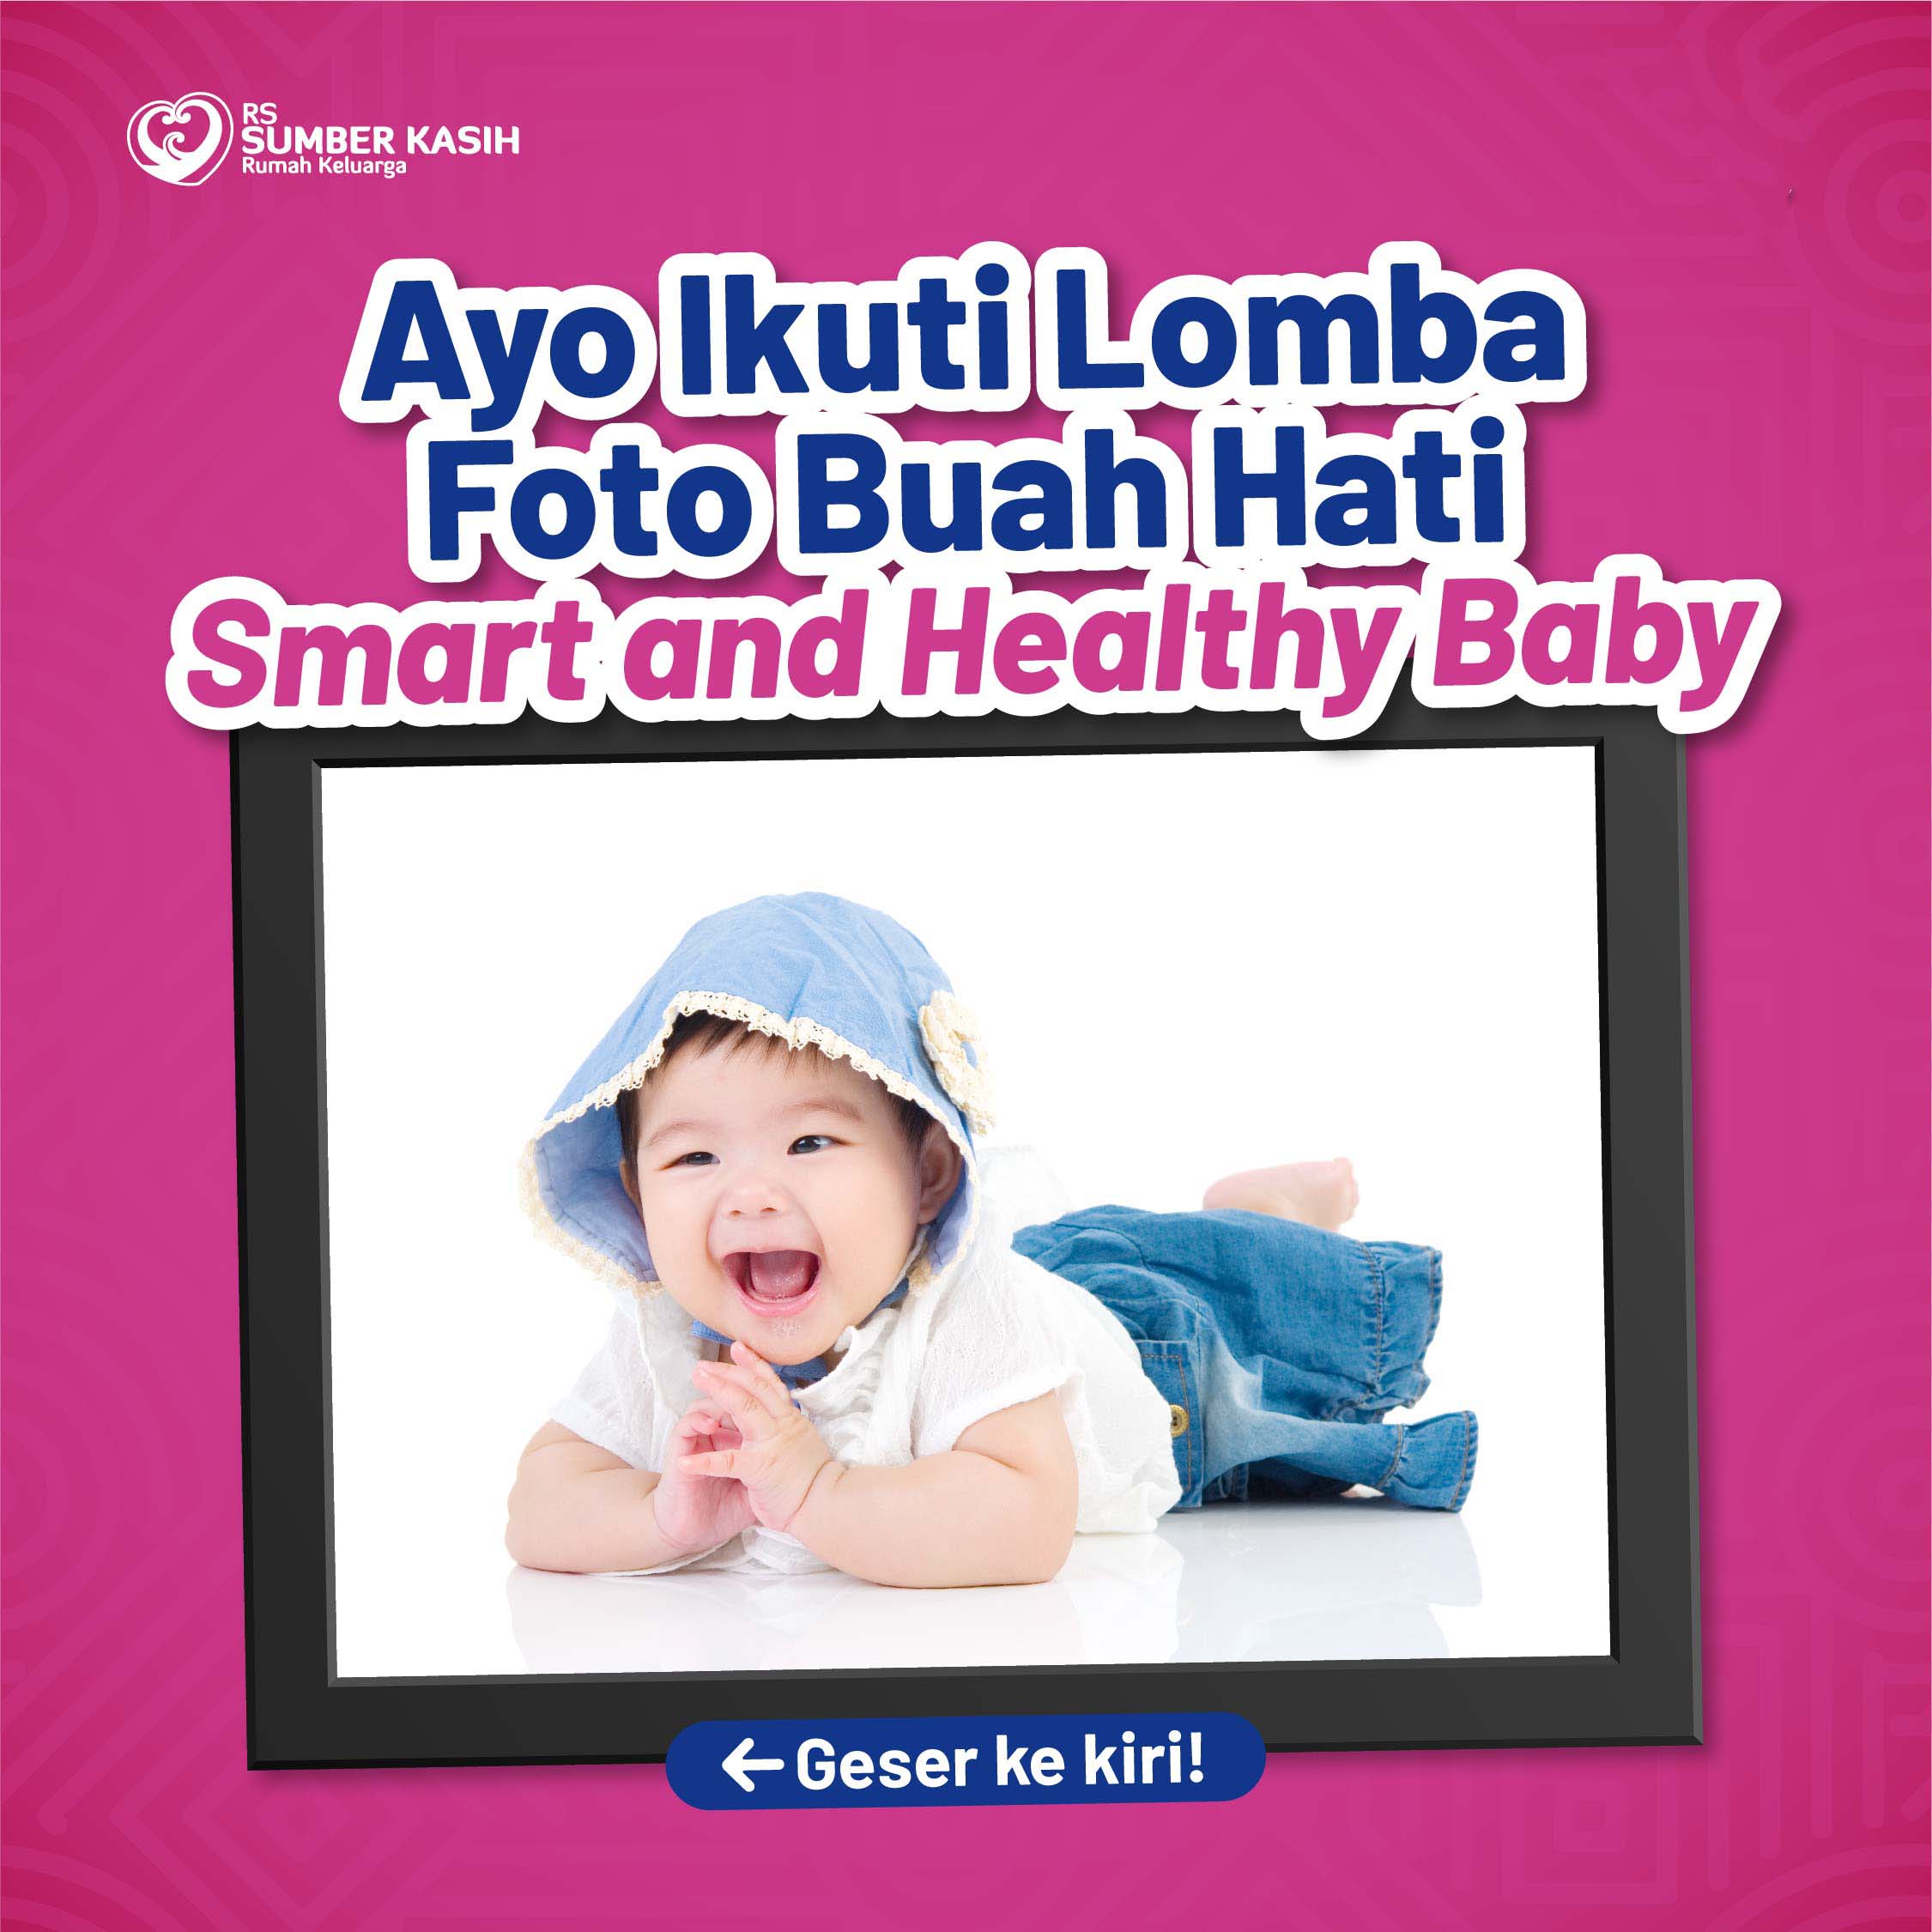 lomba-foto-smart-and-healthy-baby